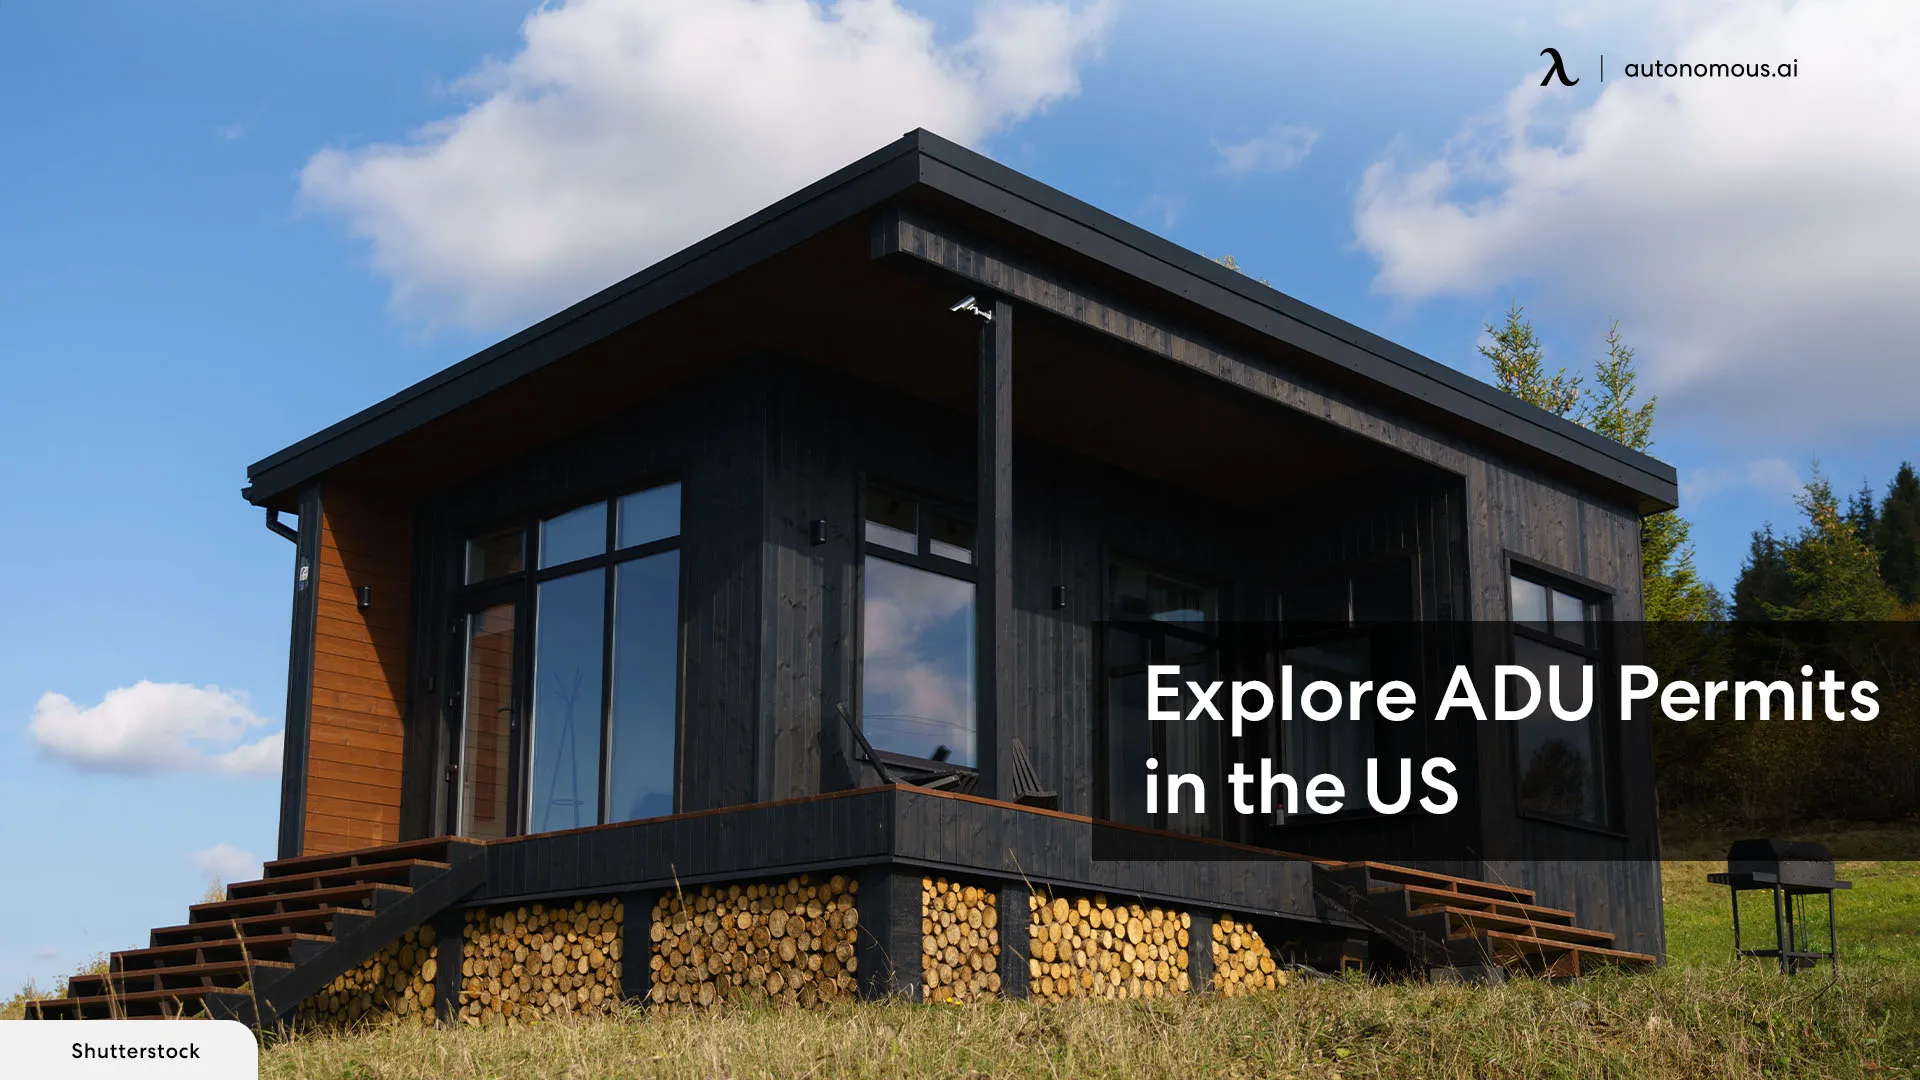 A Comprehensive Guide to ADU Permits in the US